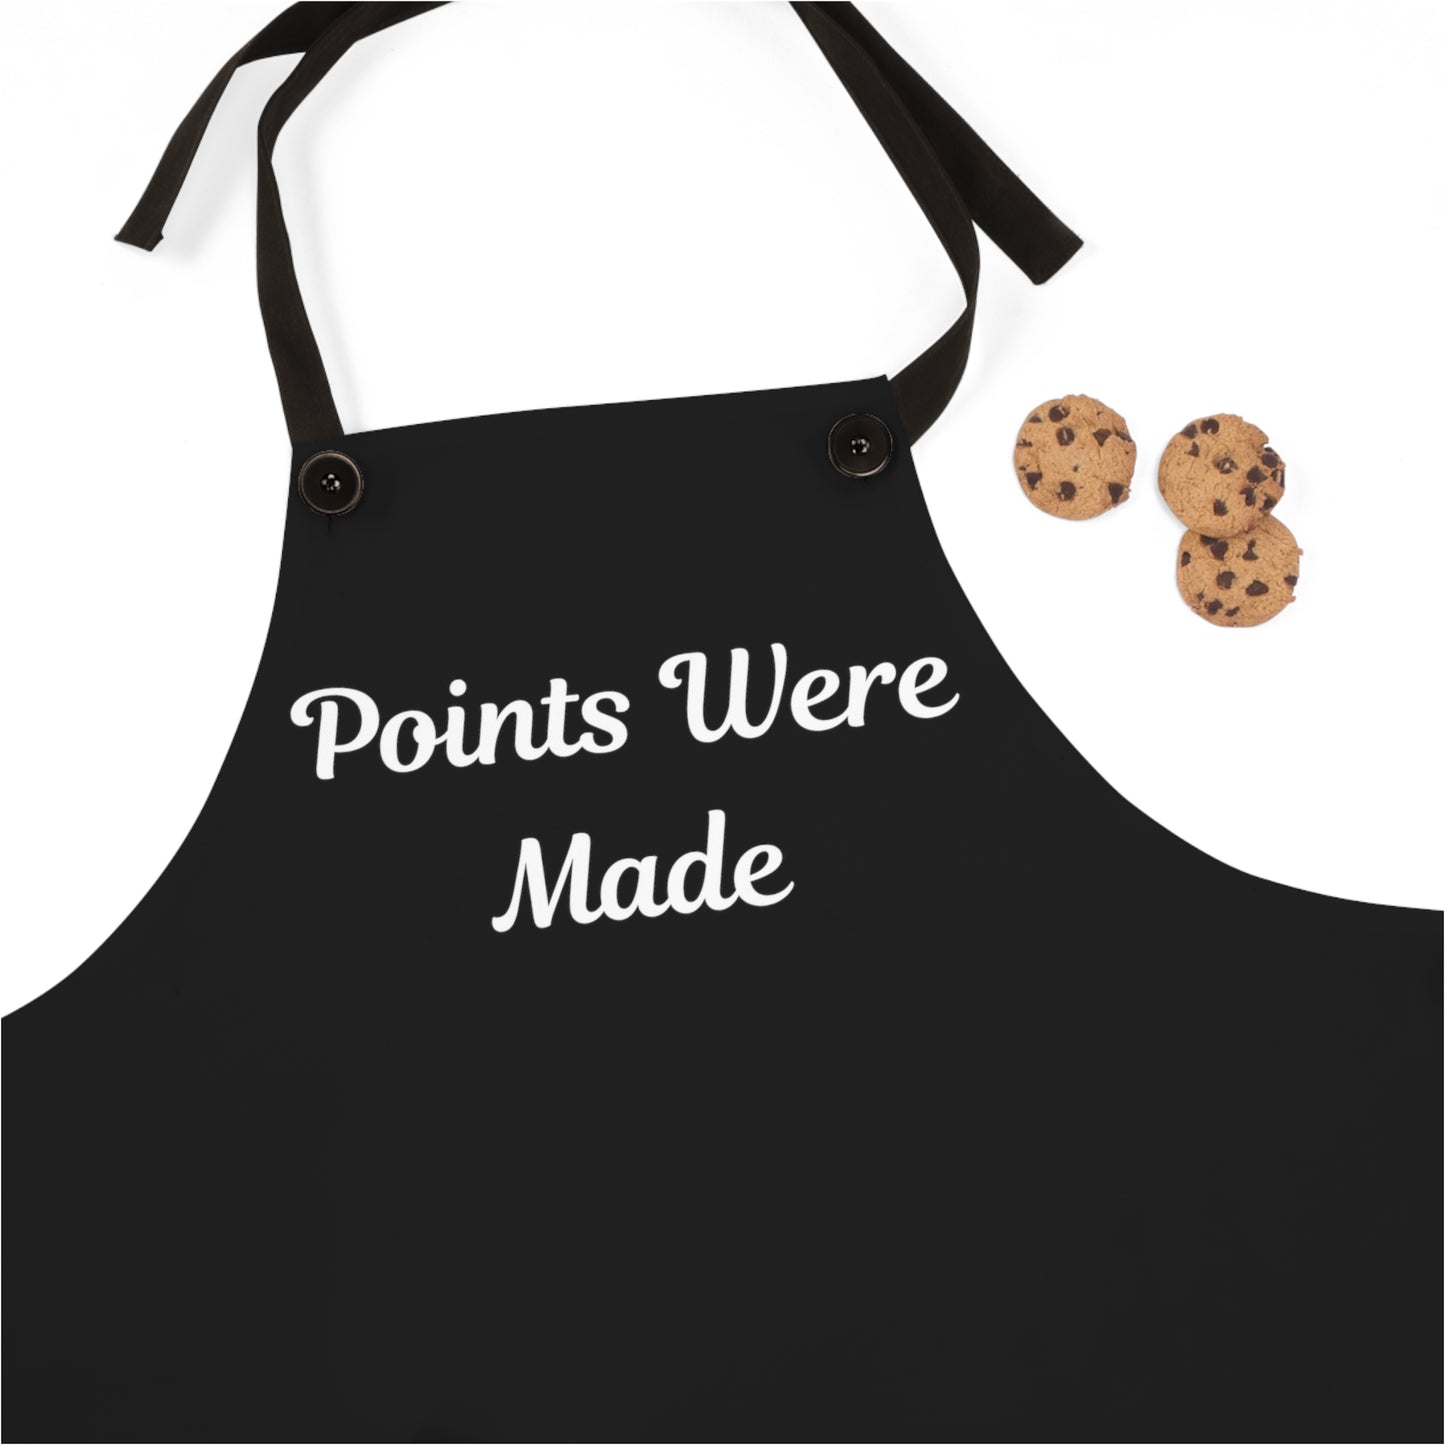 Points Were Made Apron Black with White Lettering